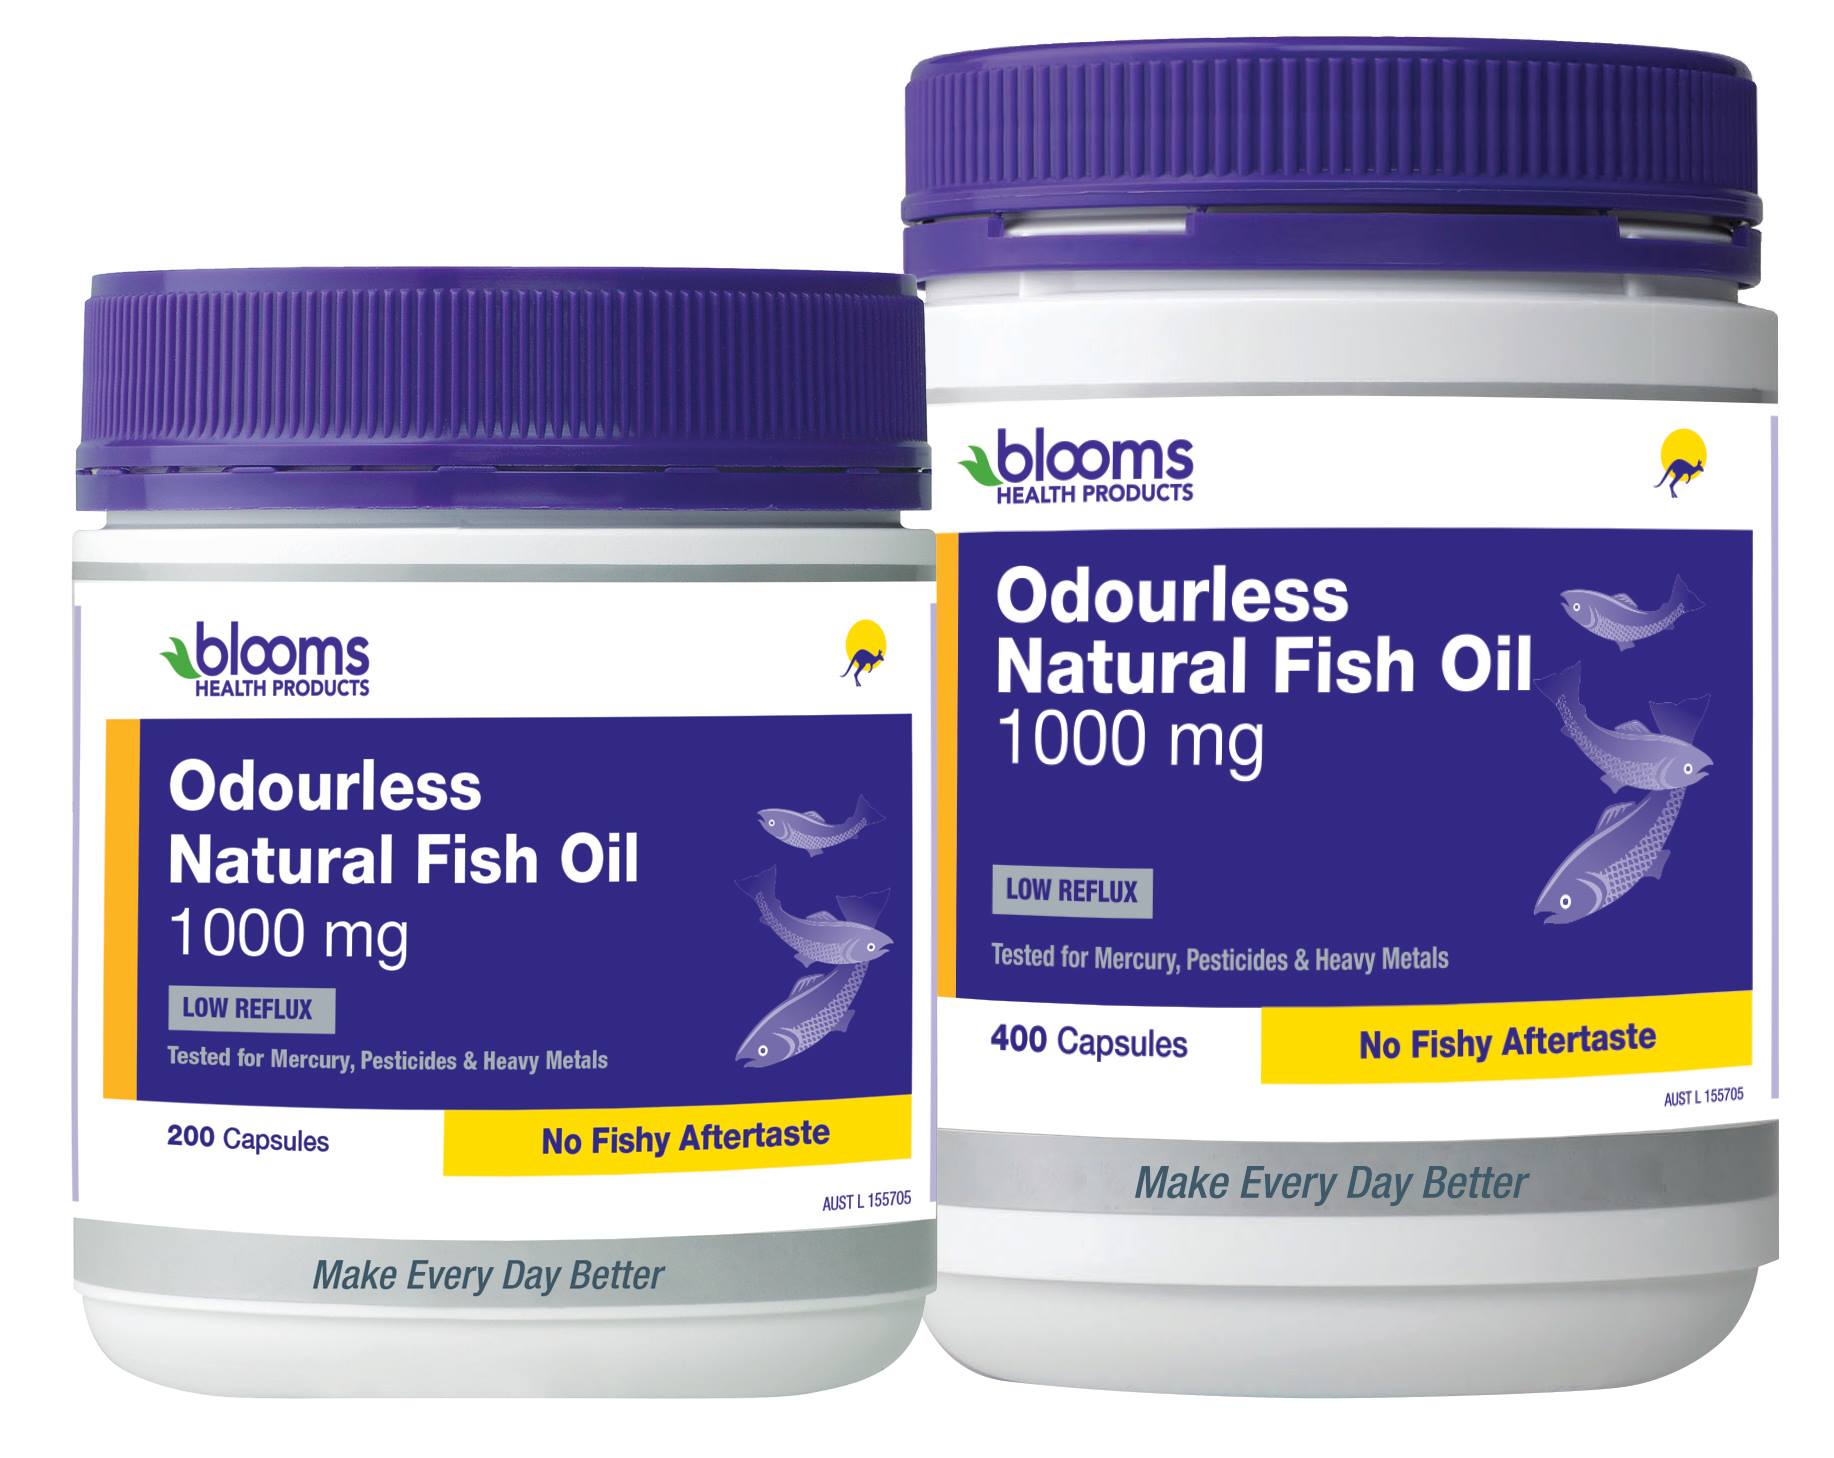 Blooms Odourless Natural Fish Oil 1000mg_media-01